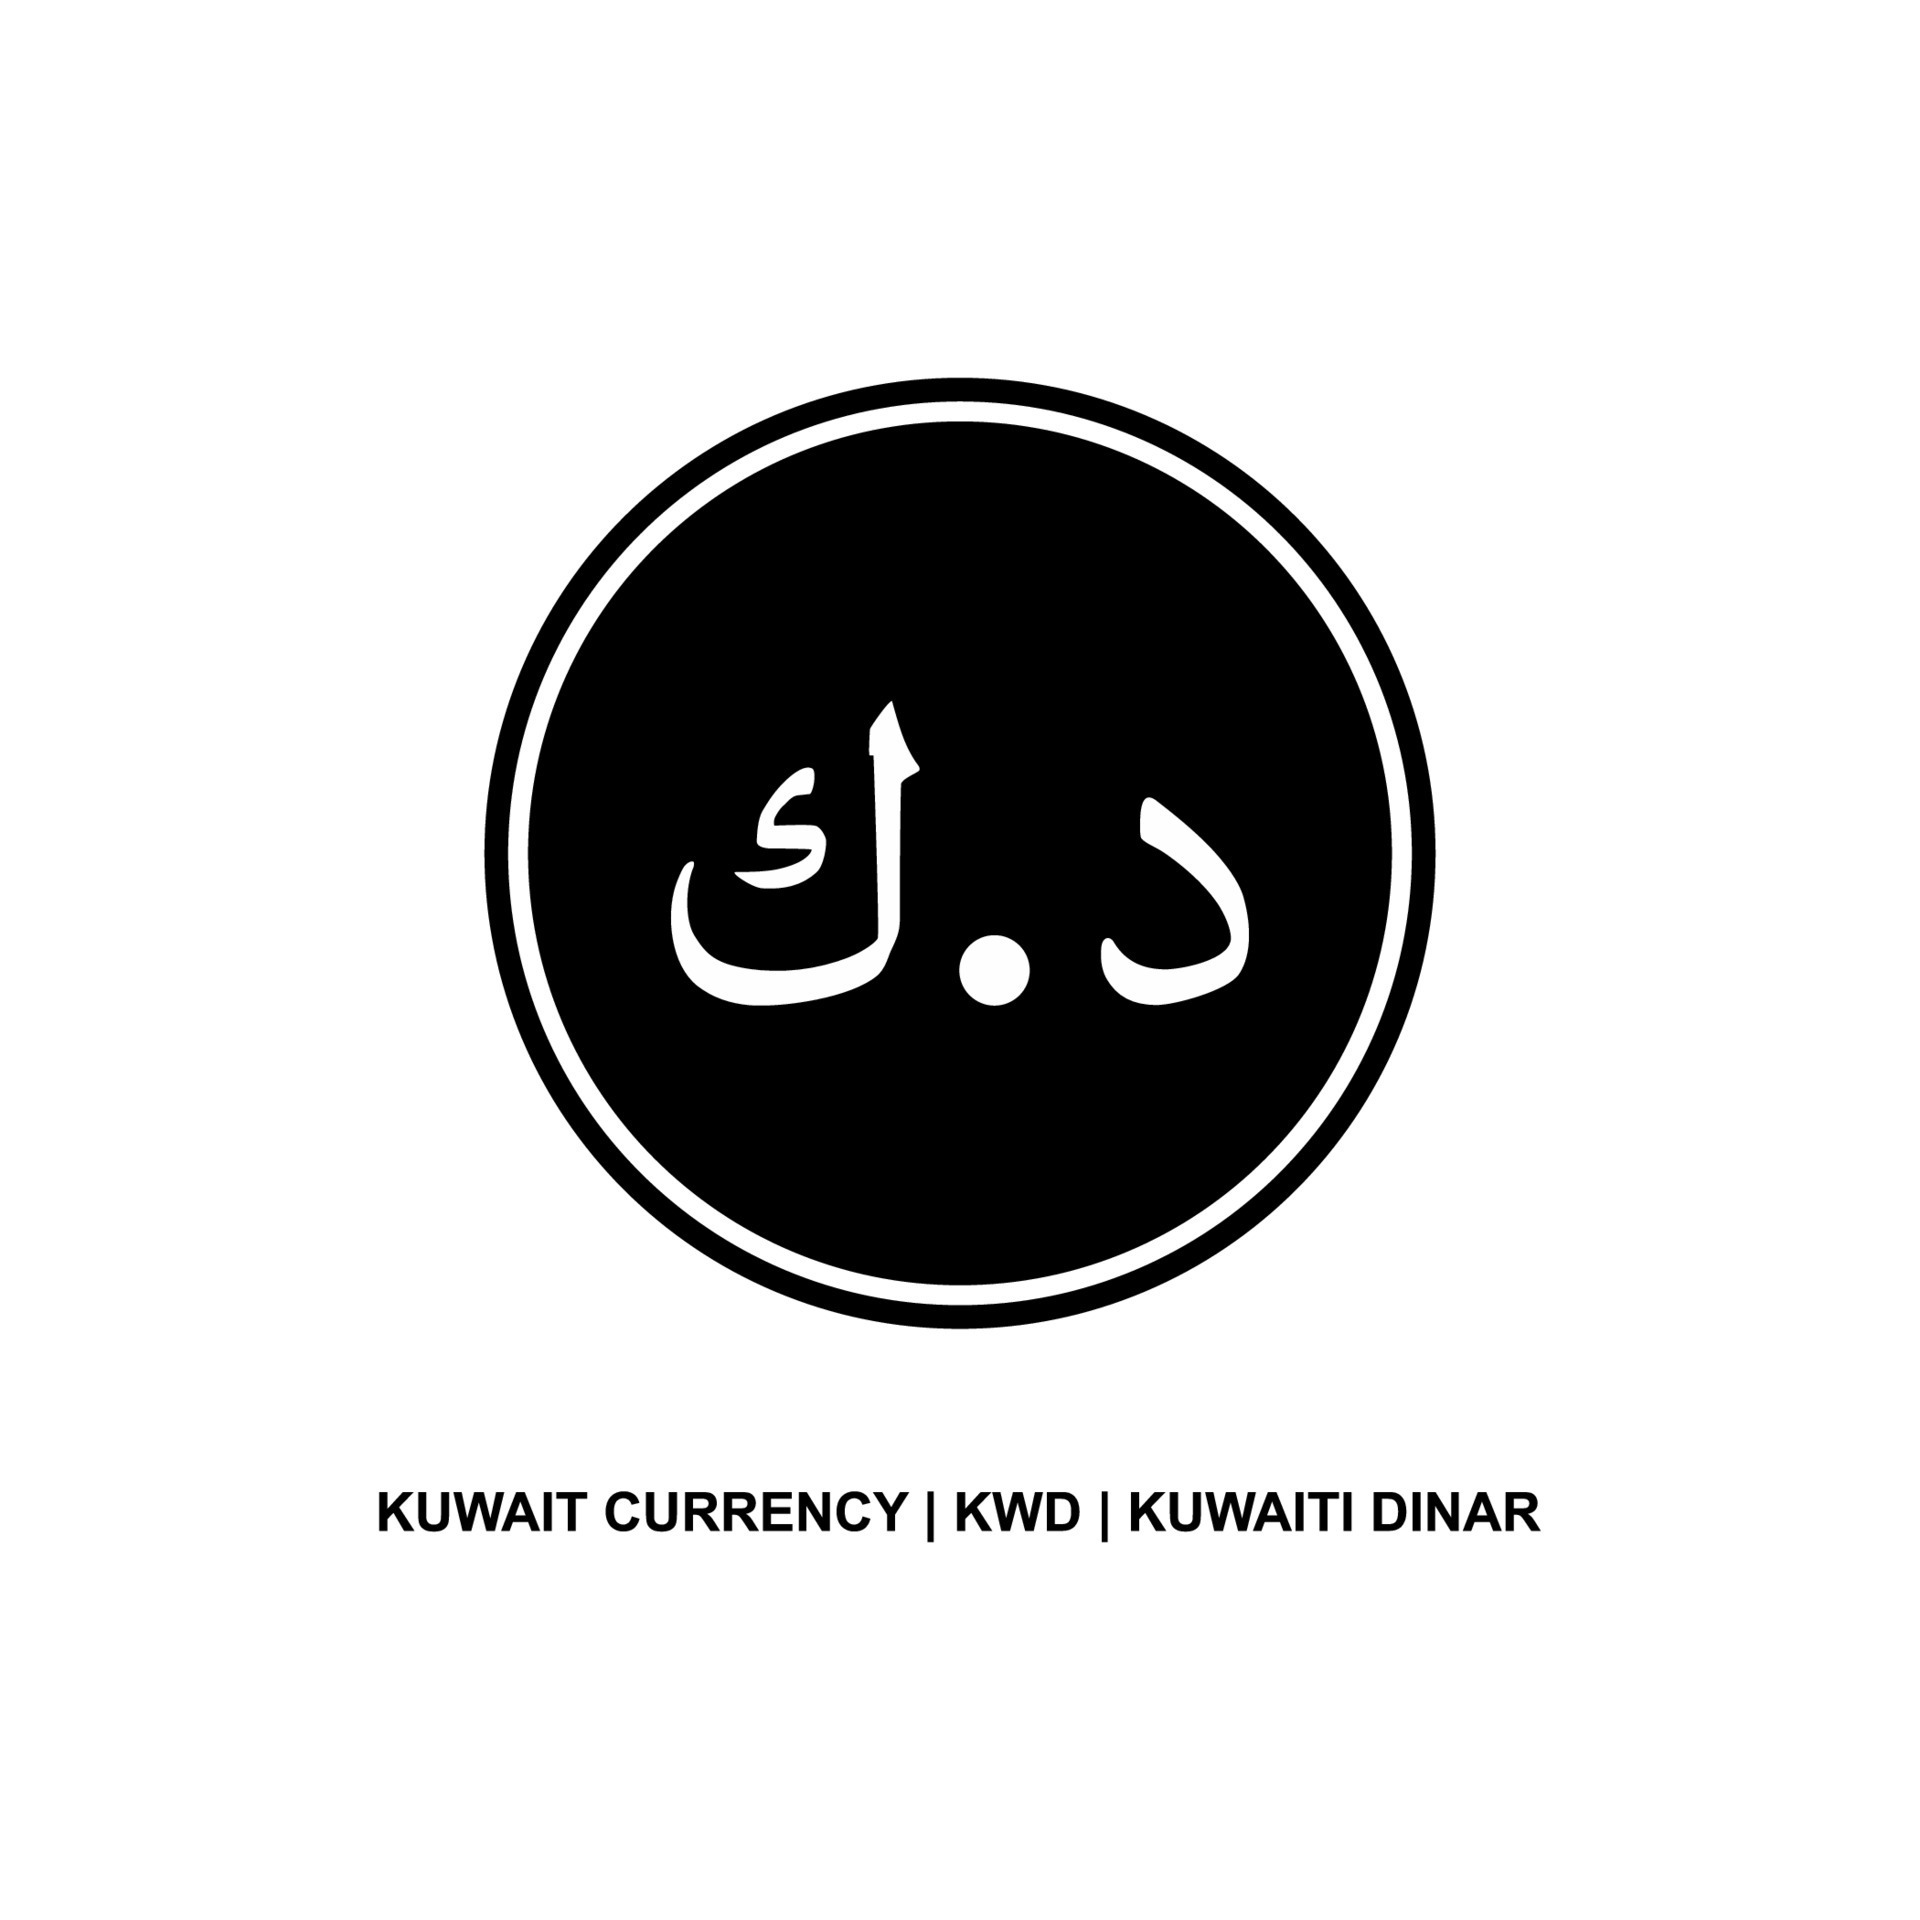 Kuwait Currency Exchange Rate | Buy and Sell Kuwaiti Dinar Currency